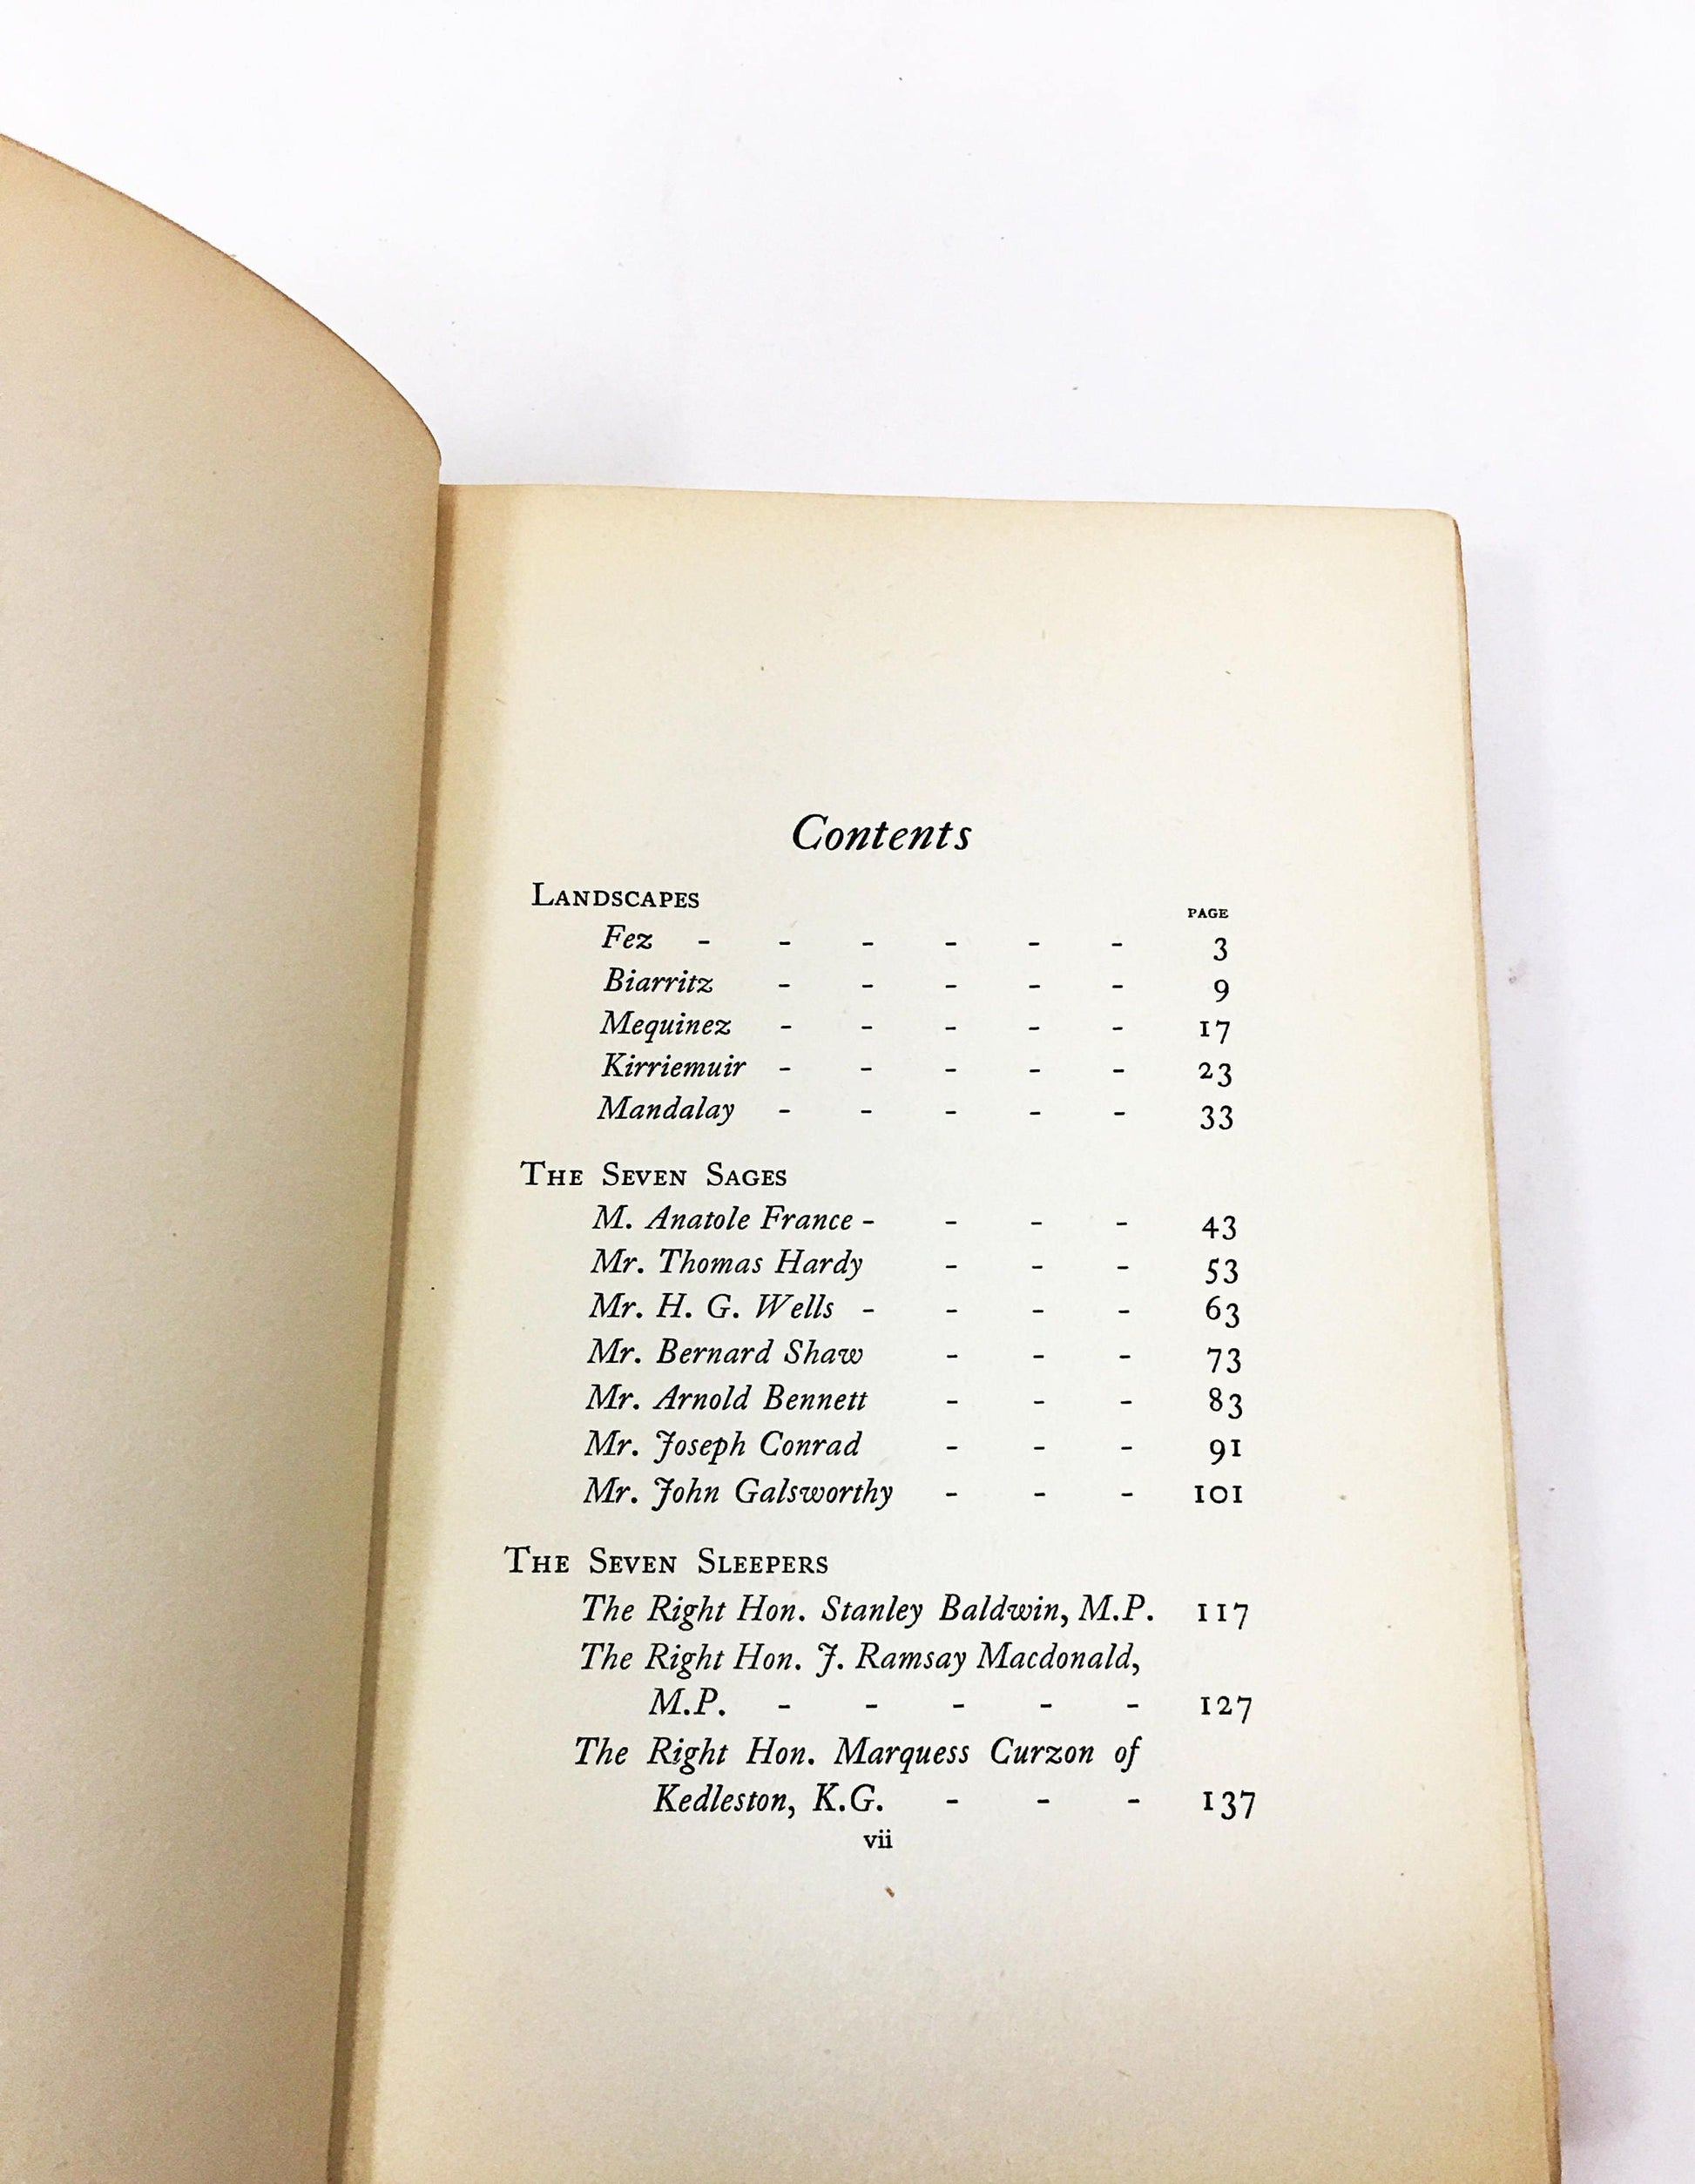 Philip Guedalla FIRST EDITION vintage Gallery book circa 1924 featuring Churchill, Hardy, Shaw, HG Wells, Conrad, Chamberlain, Cecil, Proust